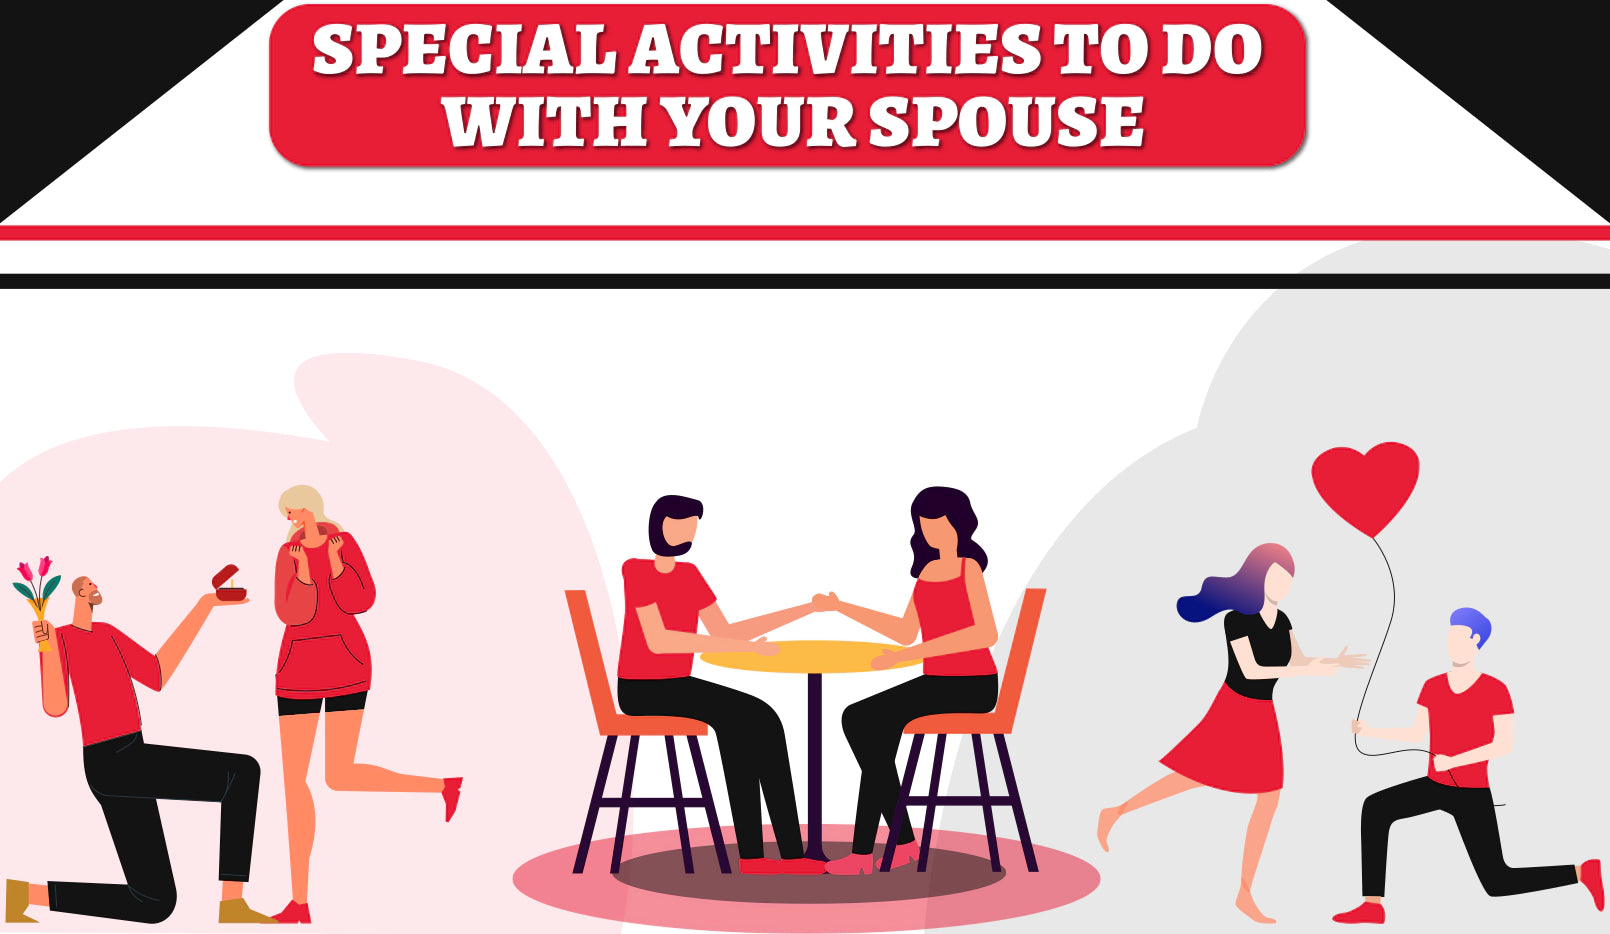 Special Activities to Do with Your Spouse